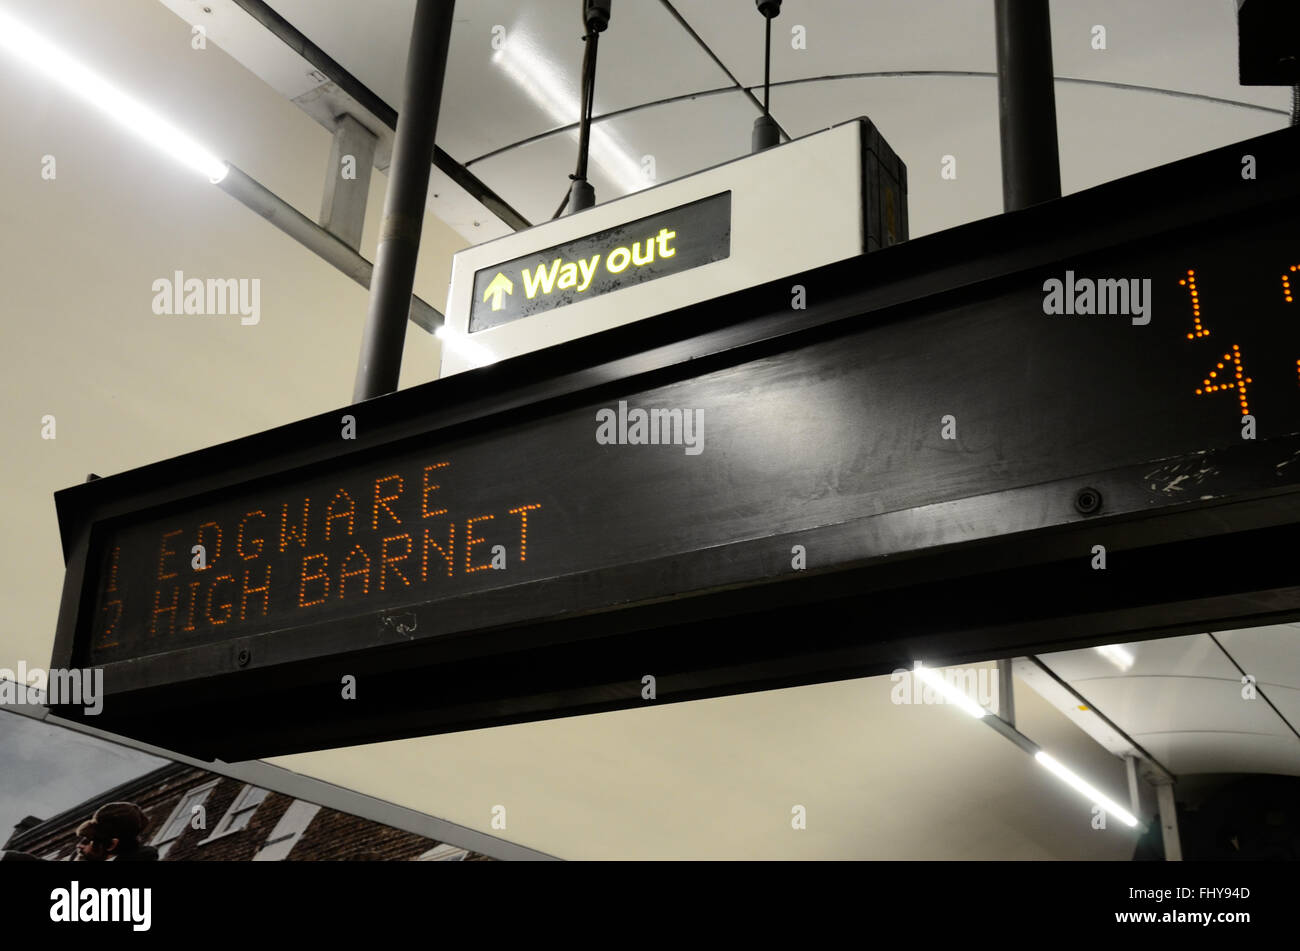 A departure board on a platform at a London Underground station Stock Photo